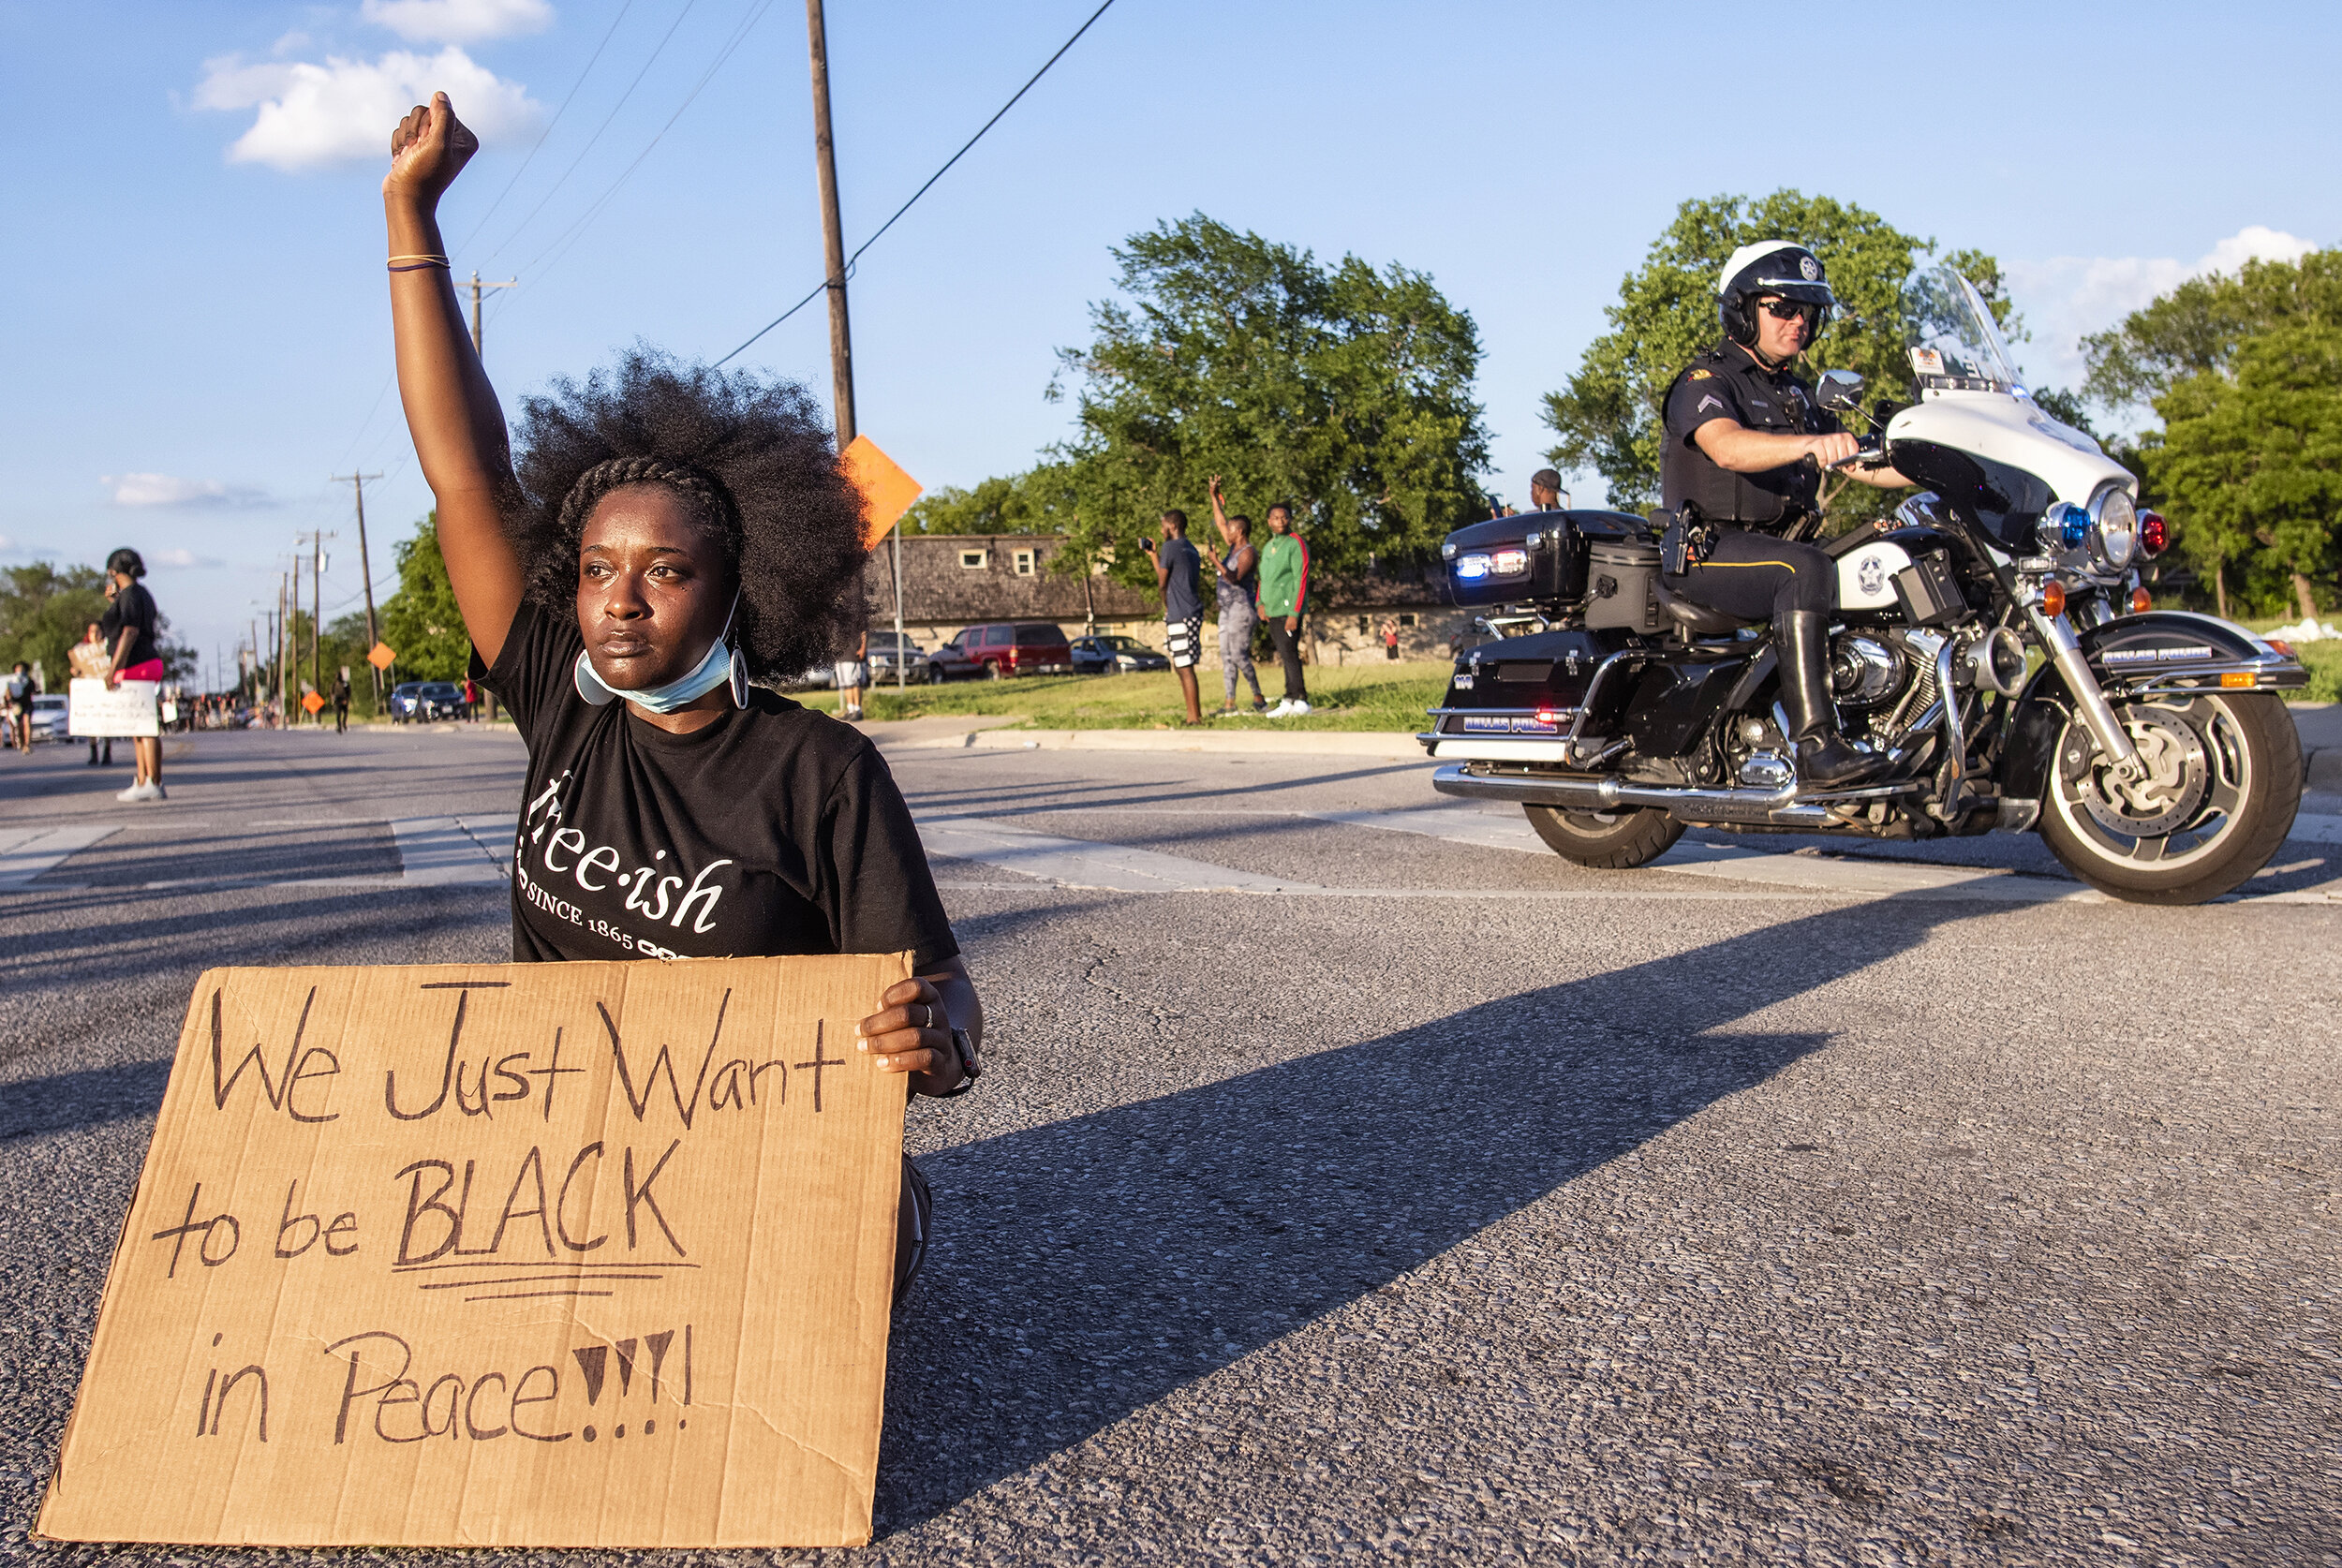  Protesters occupy the intersection of Al Lipscomb Way and South Good Latimer Expressway in south Dallas, TX on June 7, 2020.  After public outcry over aggressive police tactics employed to quell recent protests, law enforcement took a more passive a